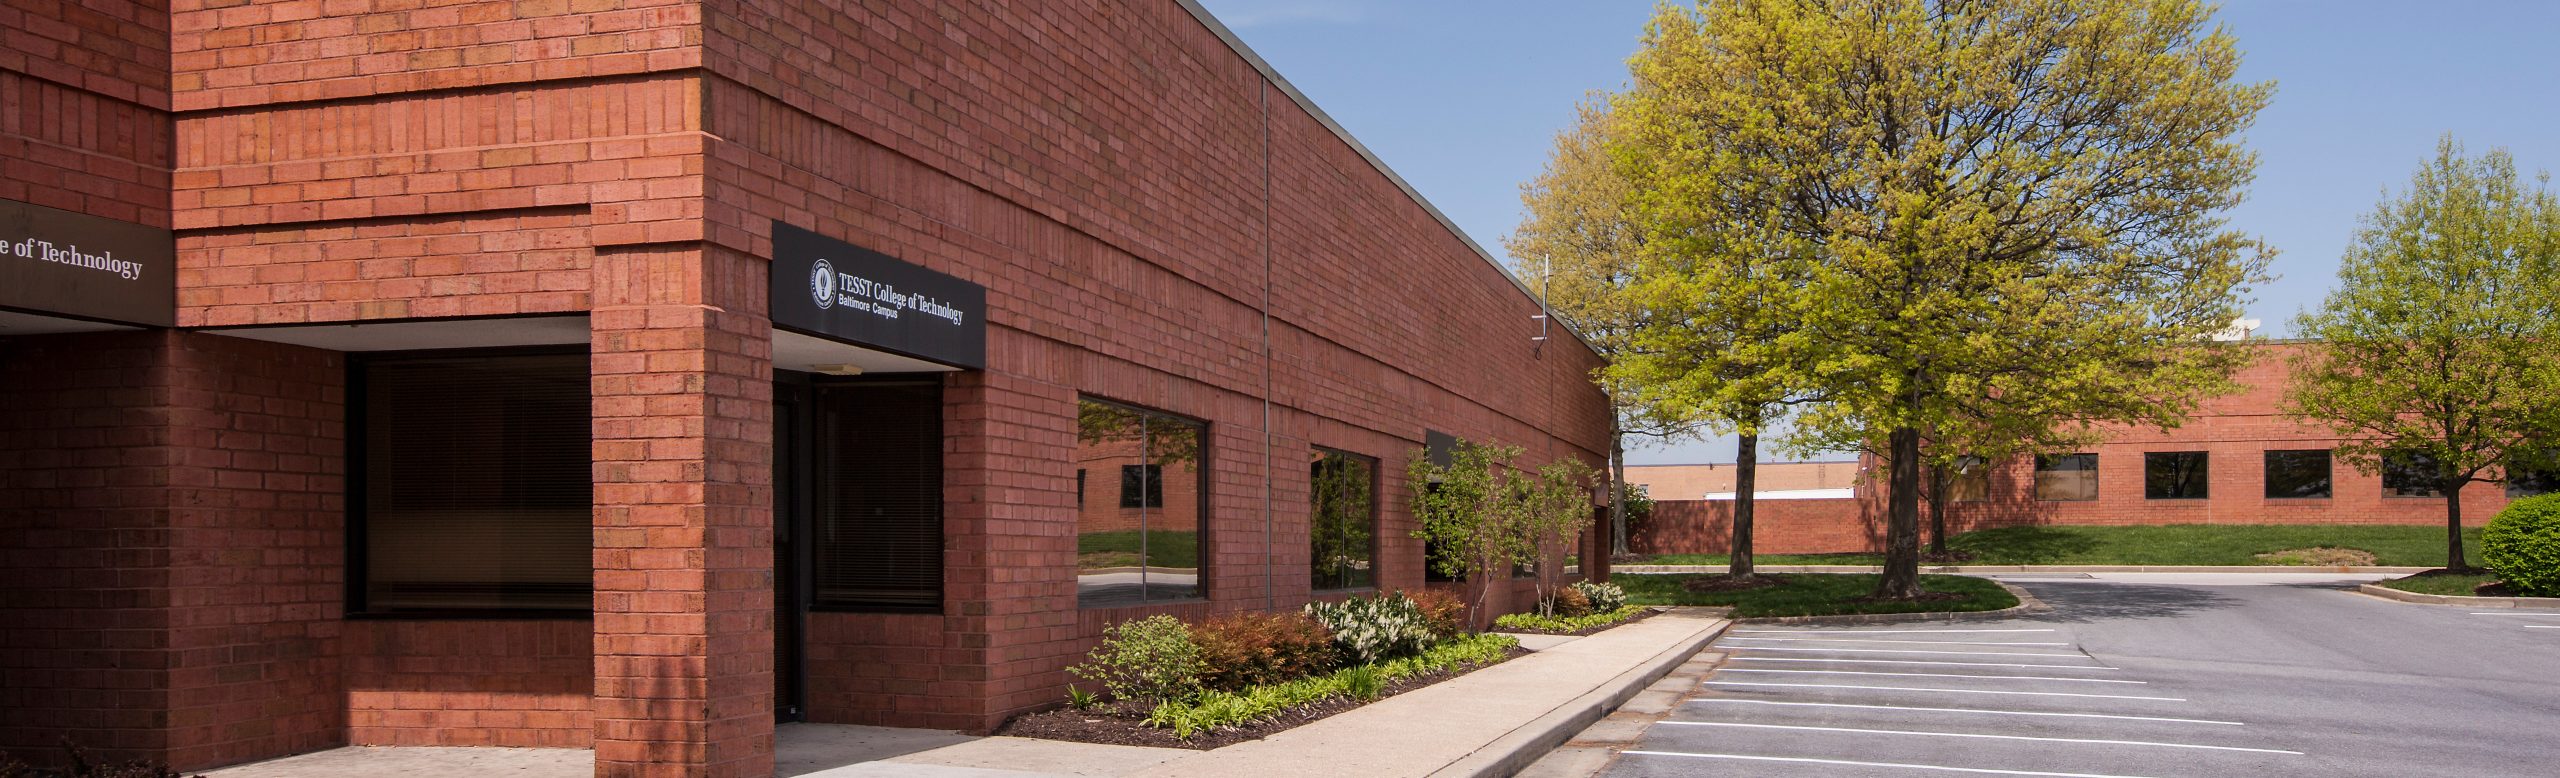 Caton Research Center is a 60-acre Baltimore County business community includes 818,650 square feet of flex/R&D and warehouse space, with quick and easy connections to downtown Baltimore, points throughout the I-95 corridor, and the Washington, D.C. suburbs.